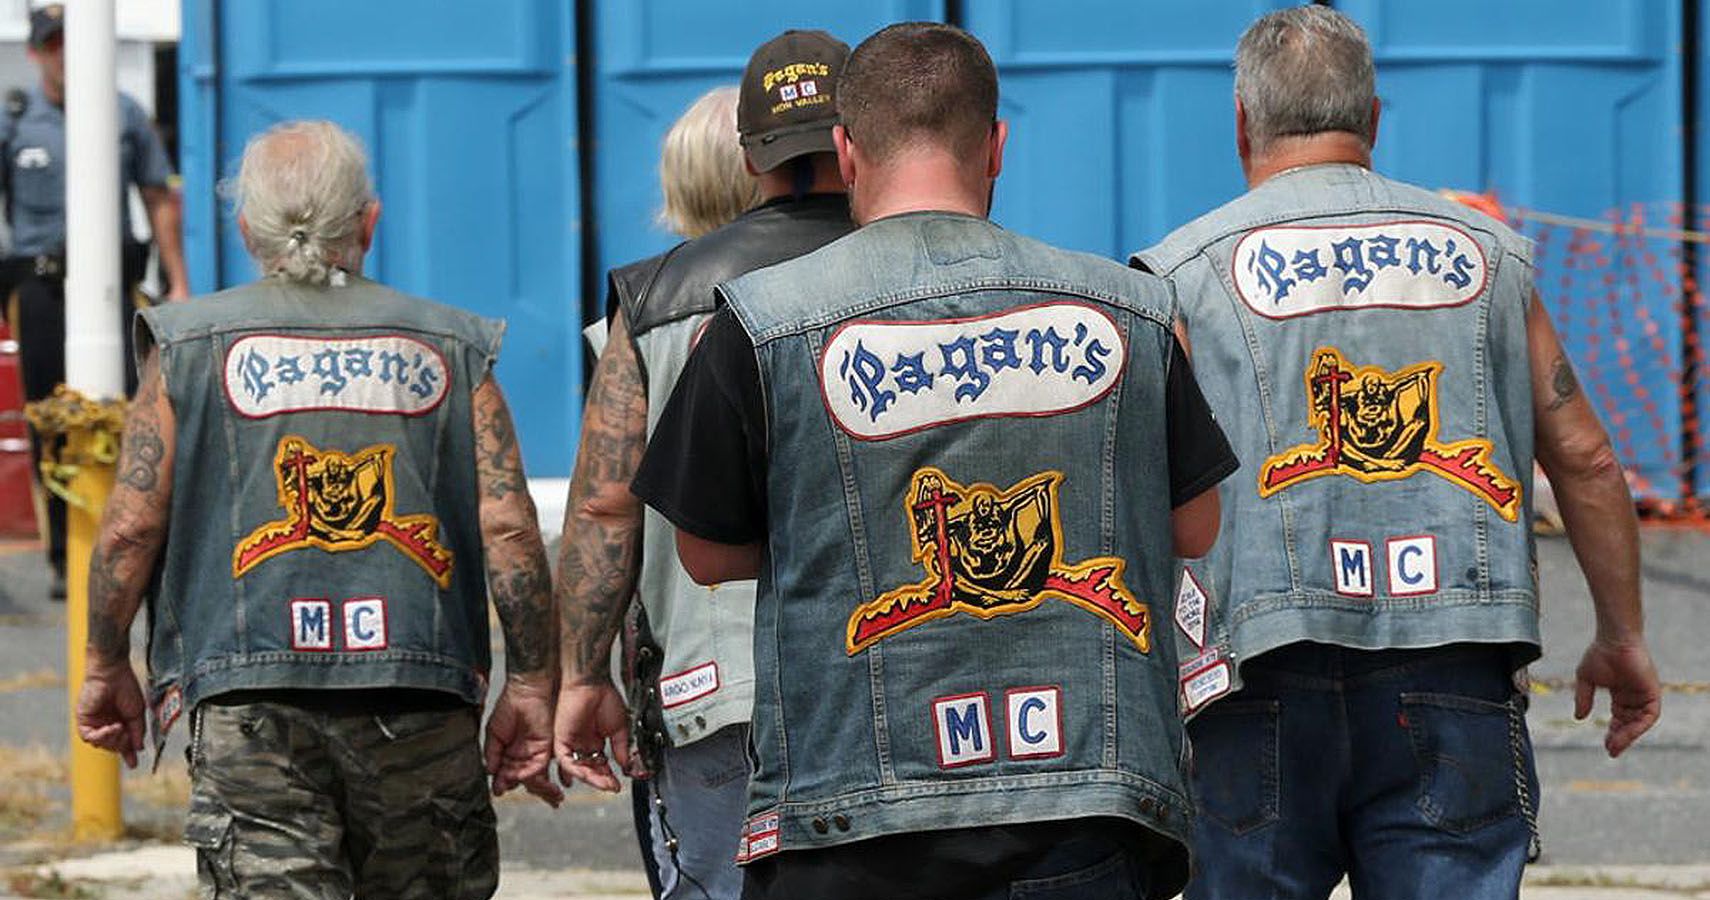 16 Things You Didn't Know About The Pagan's Motorcycle Club